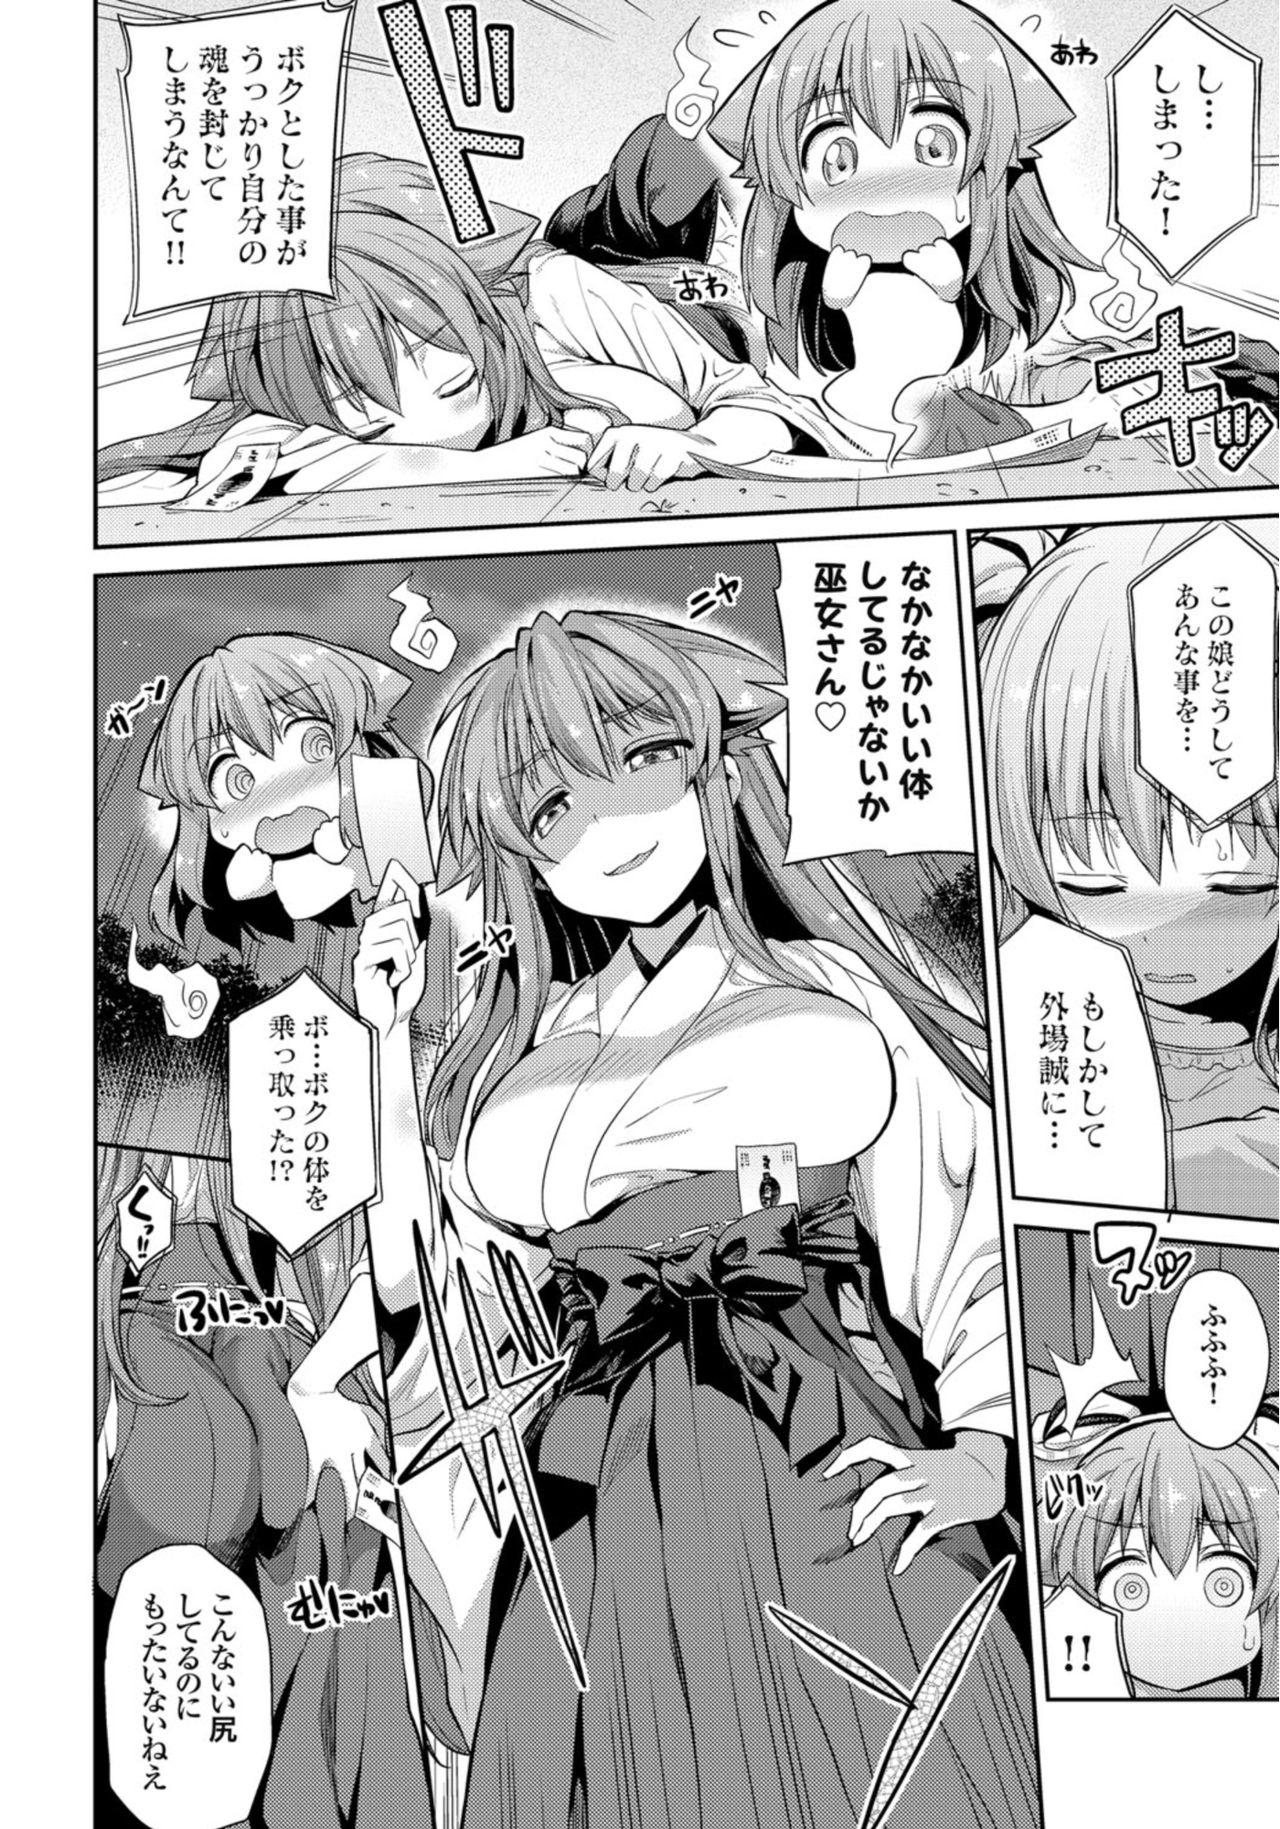 Para 憑りつき×乗っ取り×孕ませろ！肆憑き 〜ドロリ濃厚！退魔巫女種付けレイプ！〜 Free Amateur - Page 4